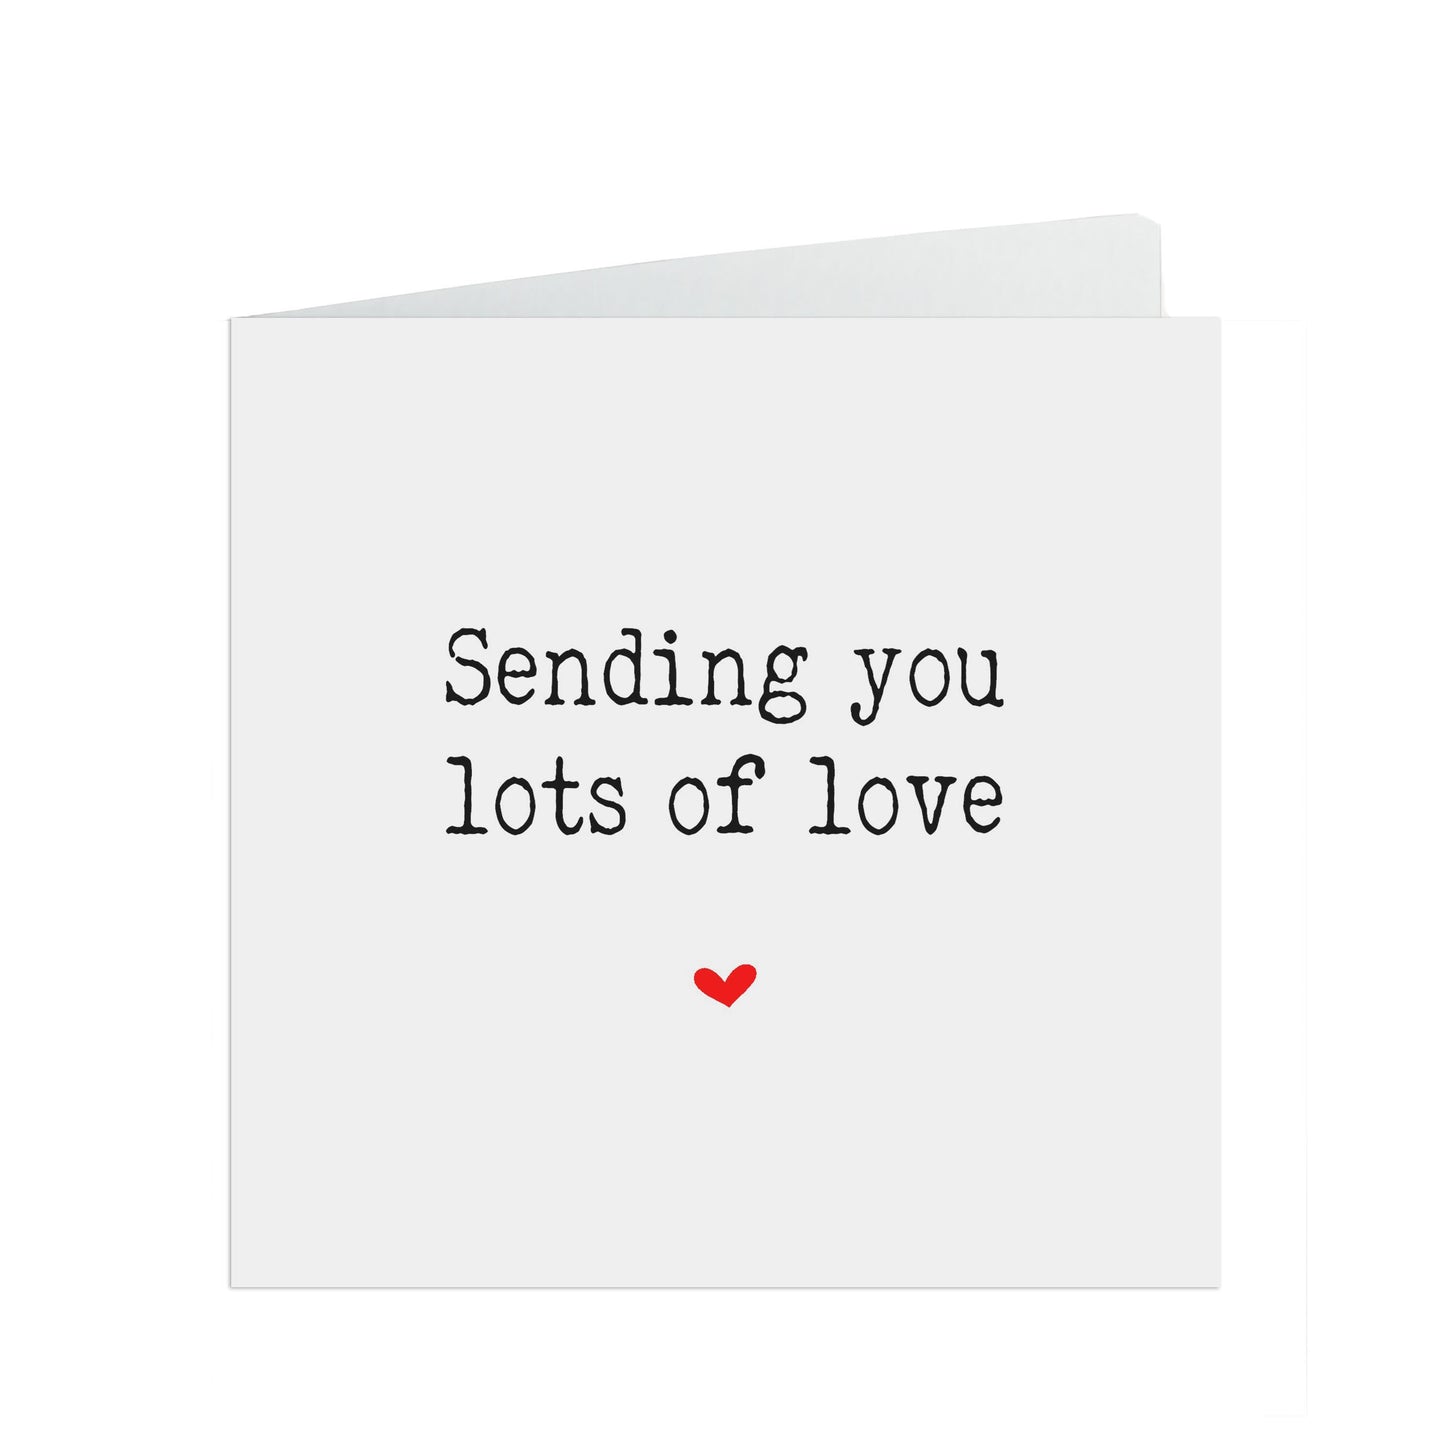 Sending you lots of love, Missing you support card